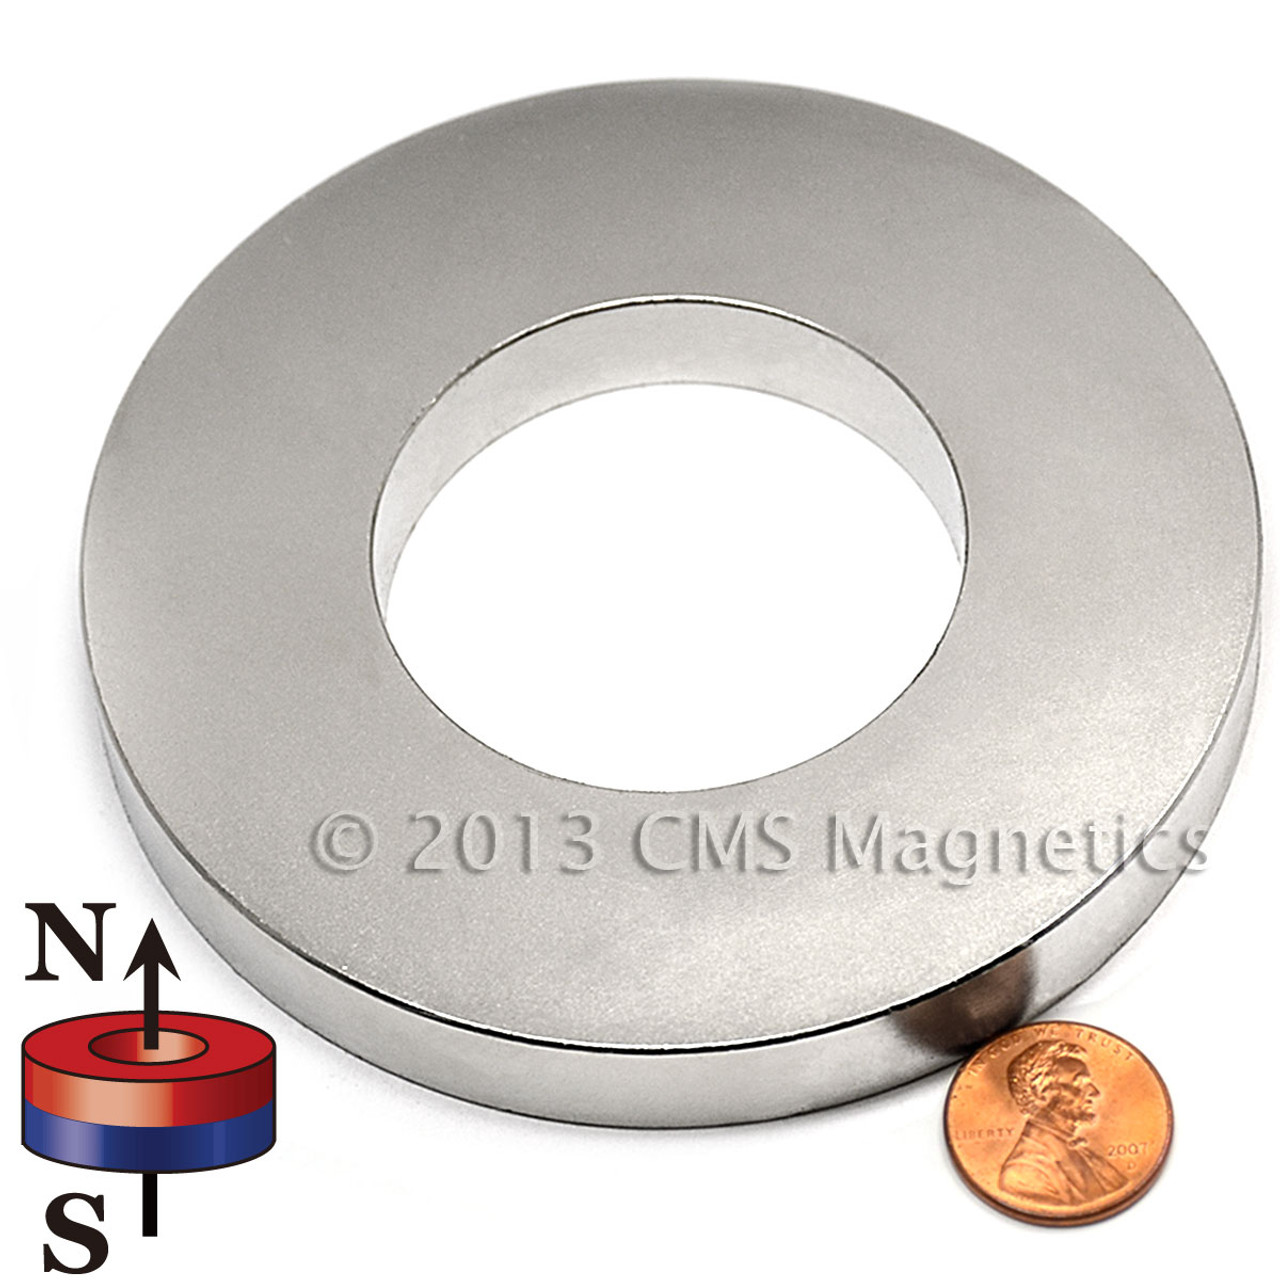 x 1/8" Hole x 1/4" N38 Small & Strong Magnetic Neodymium Ring Magnets 1/2" Dia 